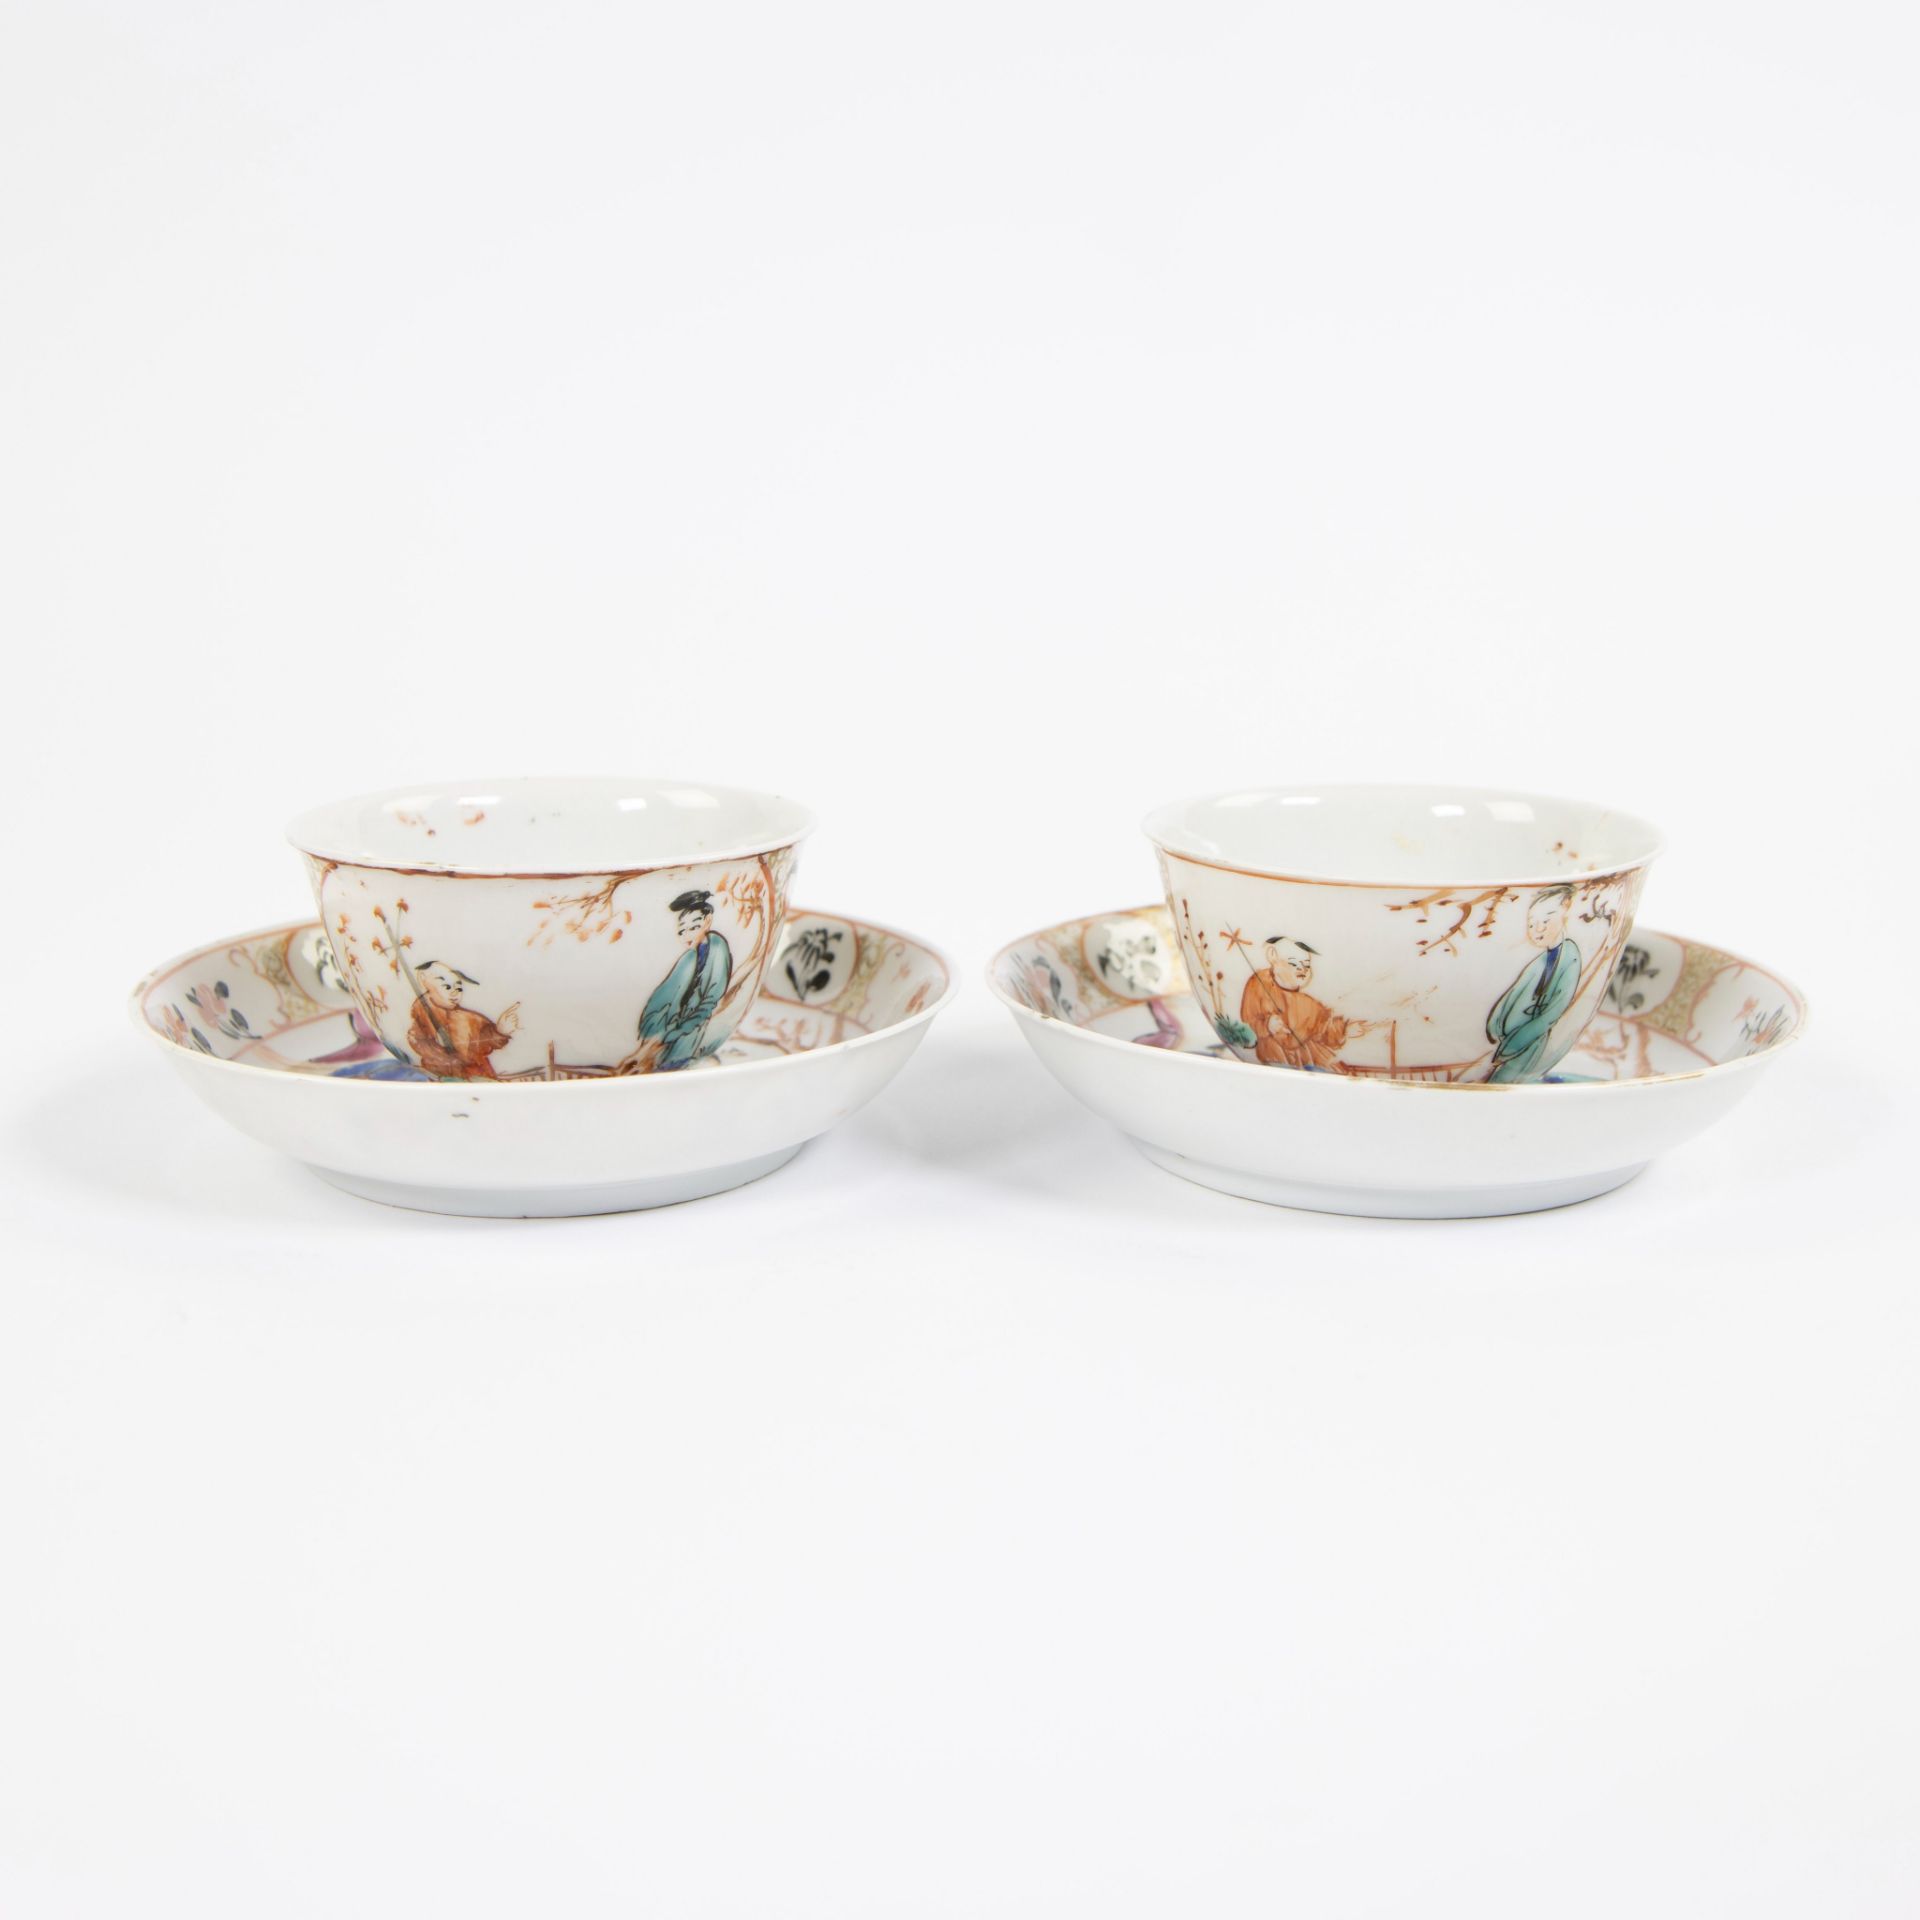 China, a pair of famille rose porcelain plates and cups with Mandarin decor, Qianlong